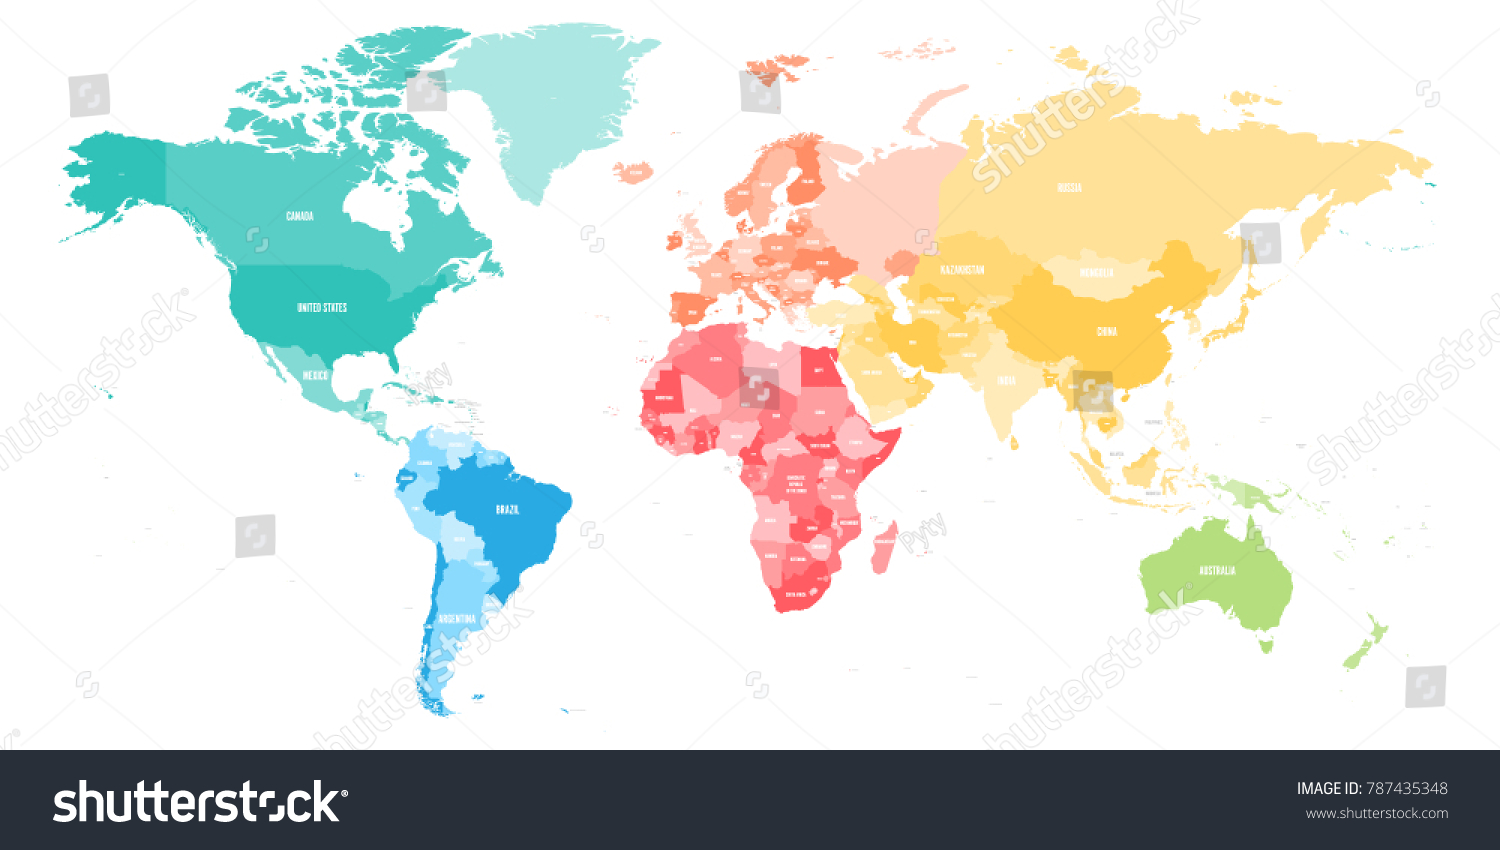 Colorful Political Map Of World Divided Into Six Royalty Free Stock Vector 787435348 5383